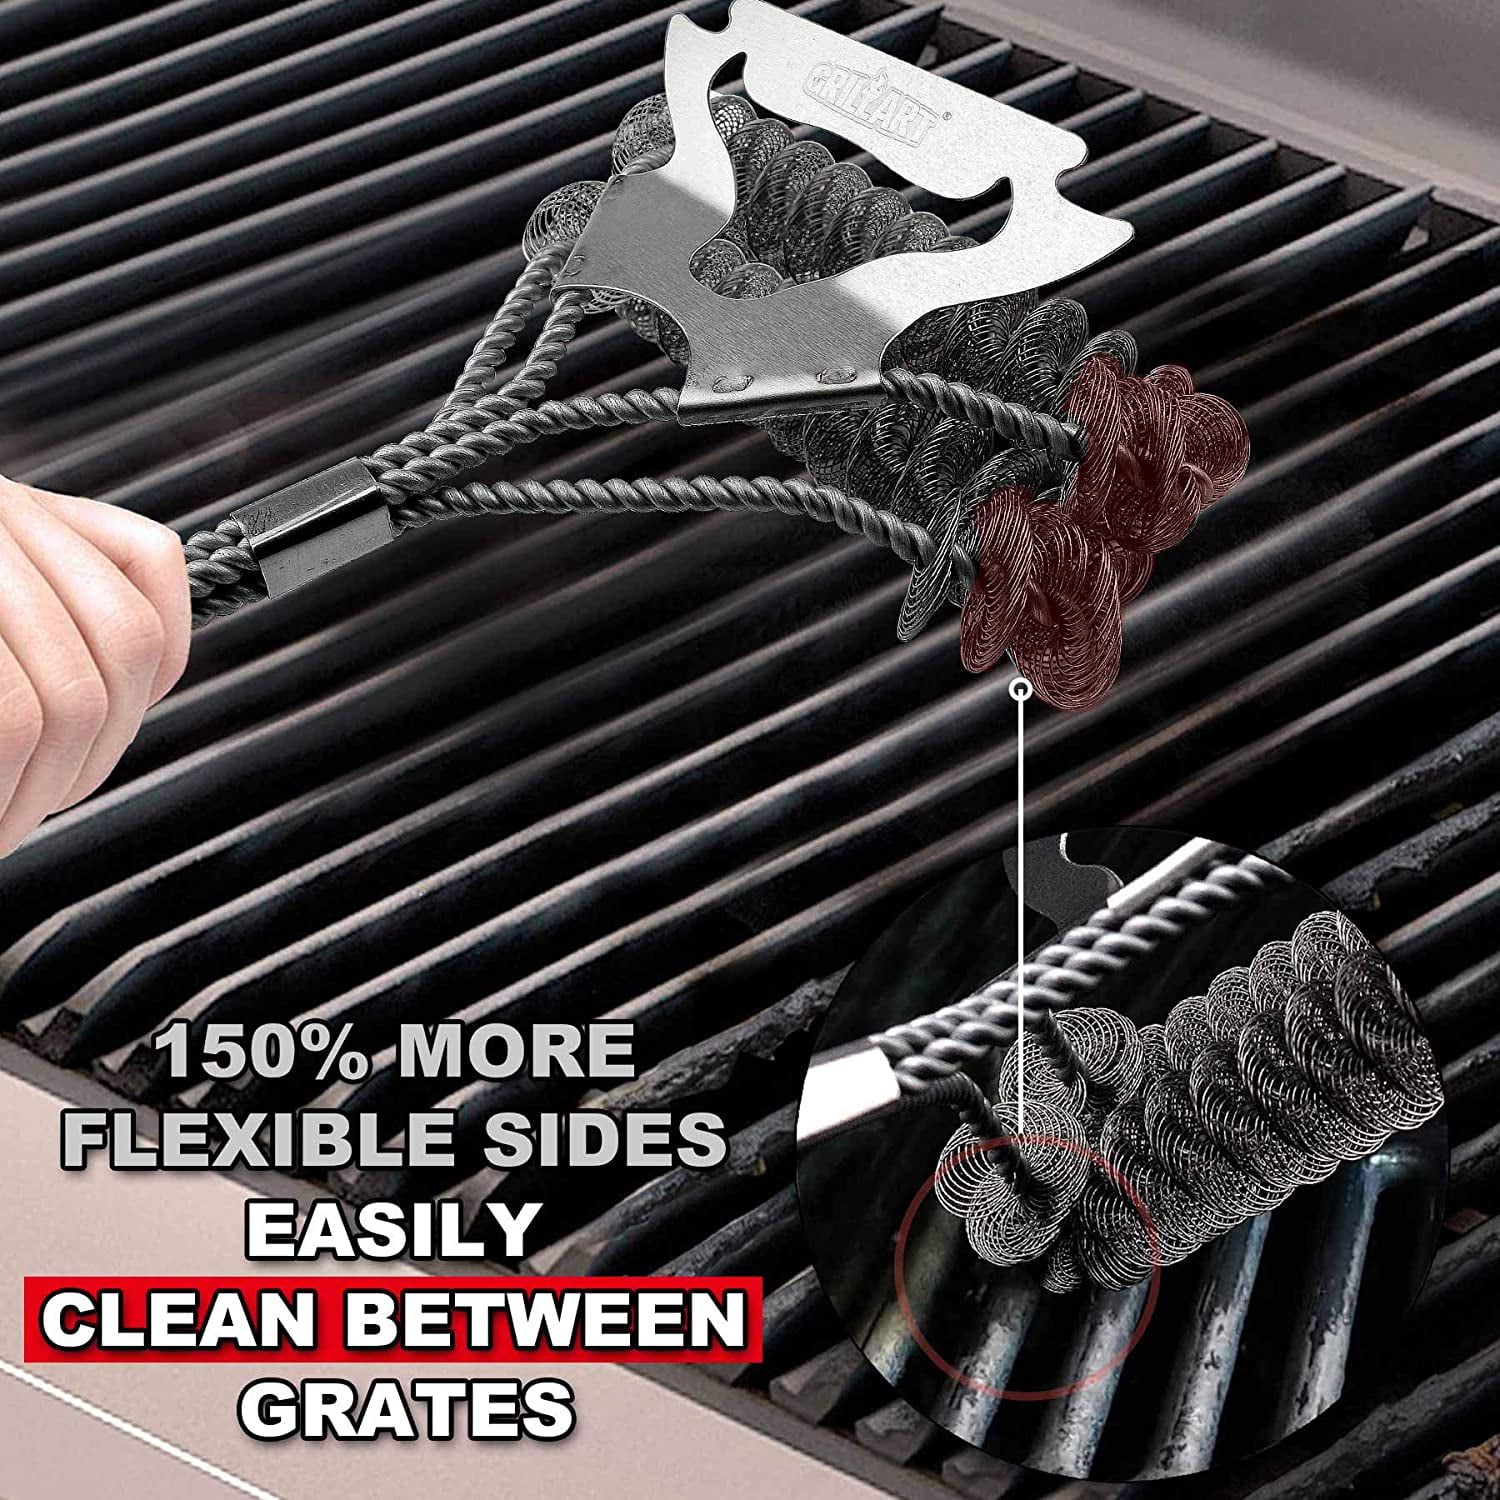 GrillFloss BBQ Grill Cleaning Scraper Tool - Best Safe Grill Brush